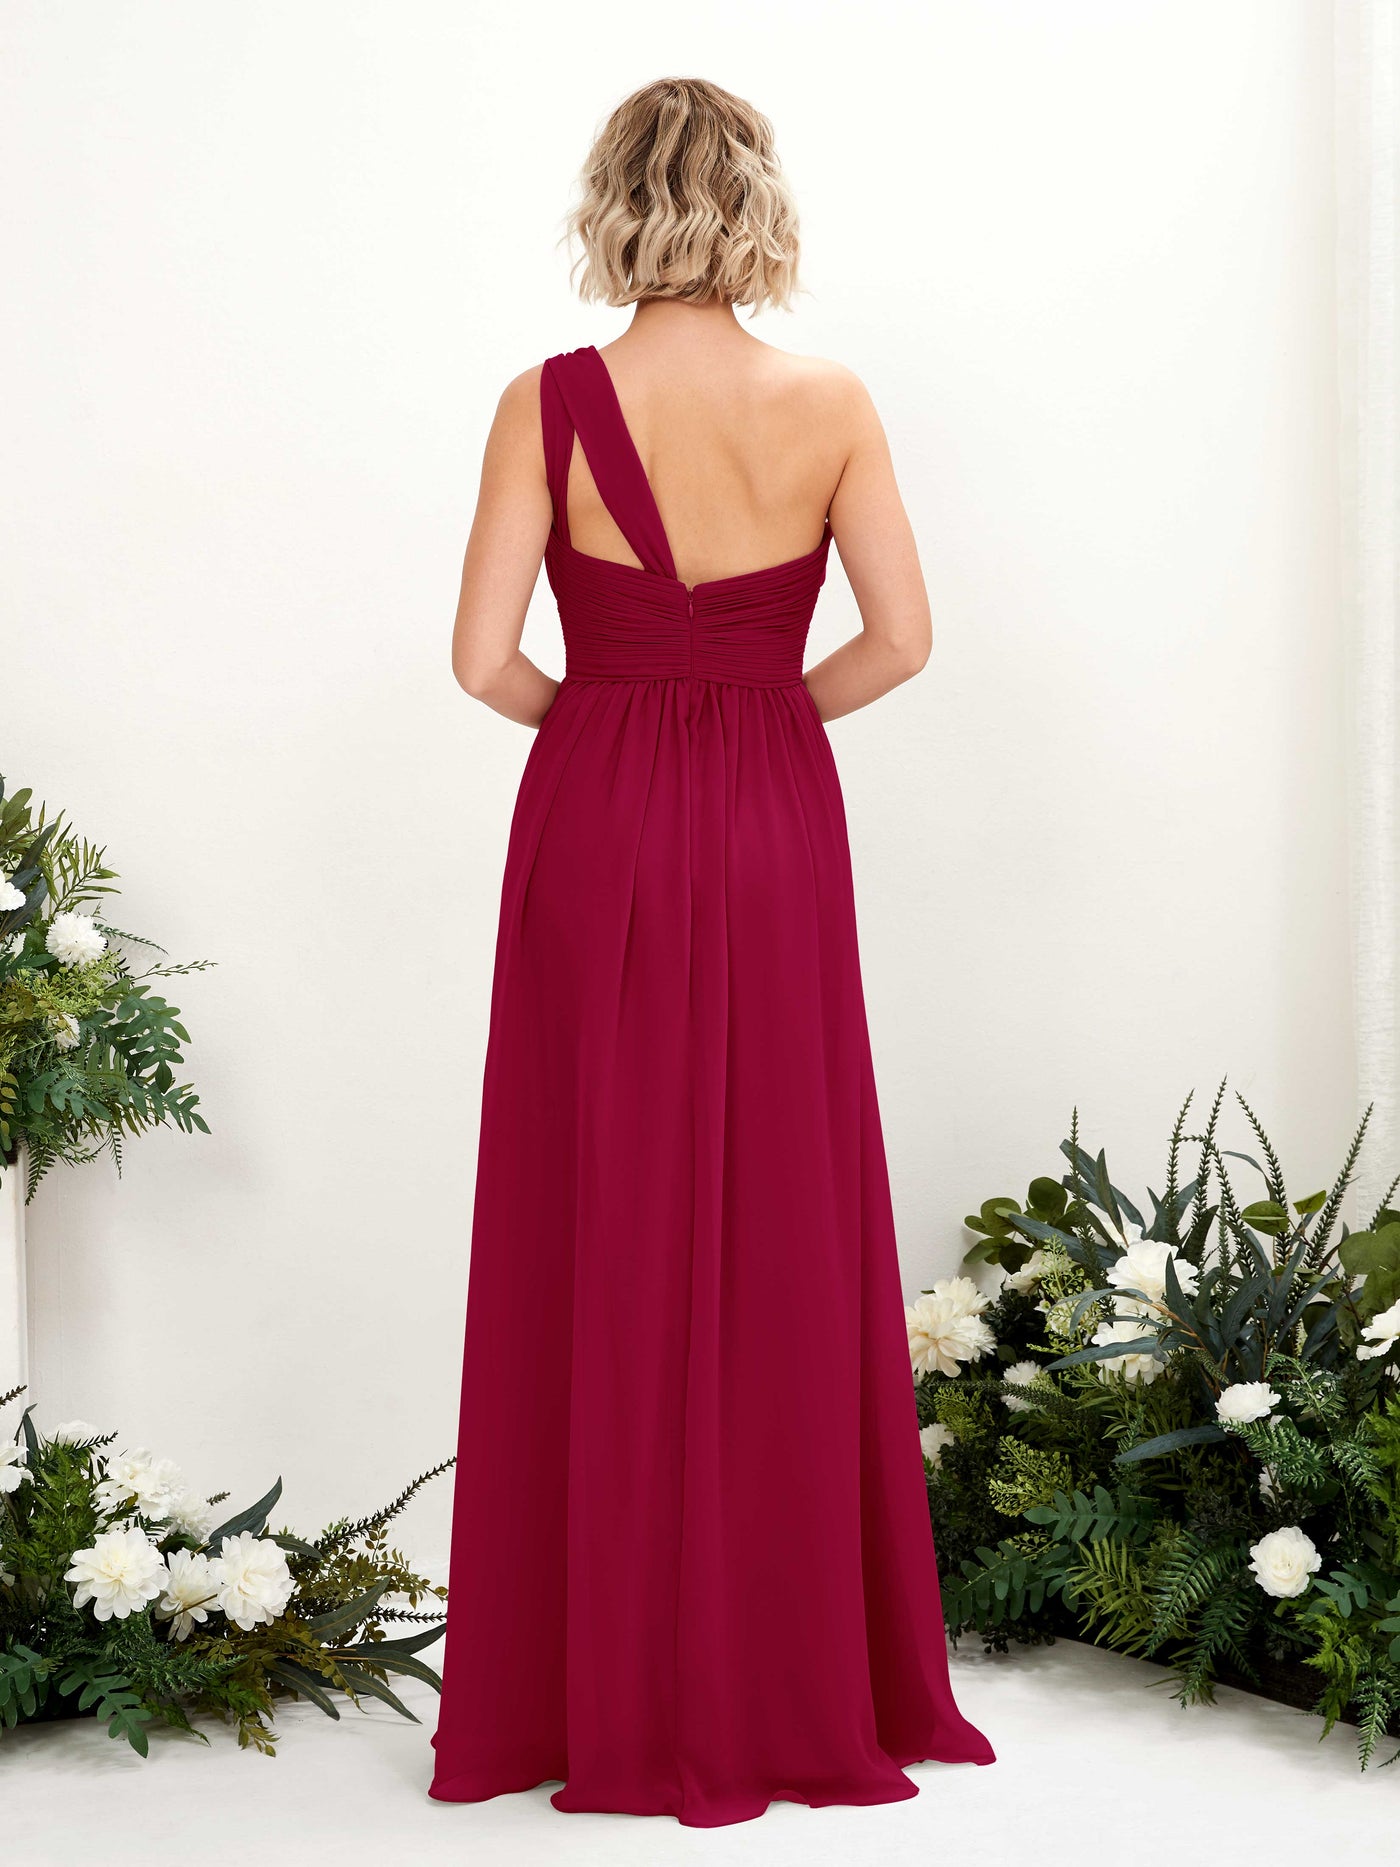 Jester Red Bridesmaid Dresses Bridesmaid Dress Ball Gown Chiffon One Shoulder Full Length Sleeveless Wedding Party Dress (81225041)#color_jester-red